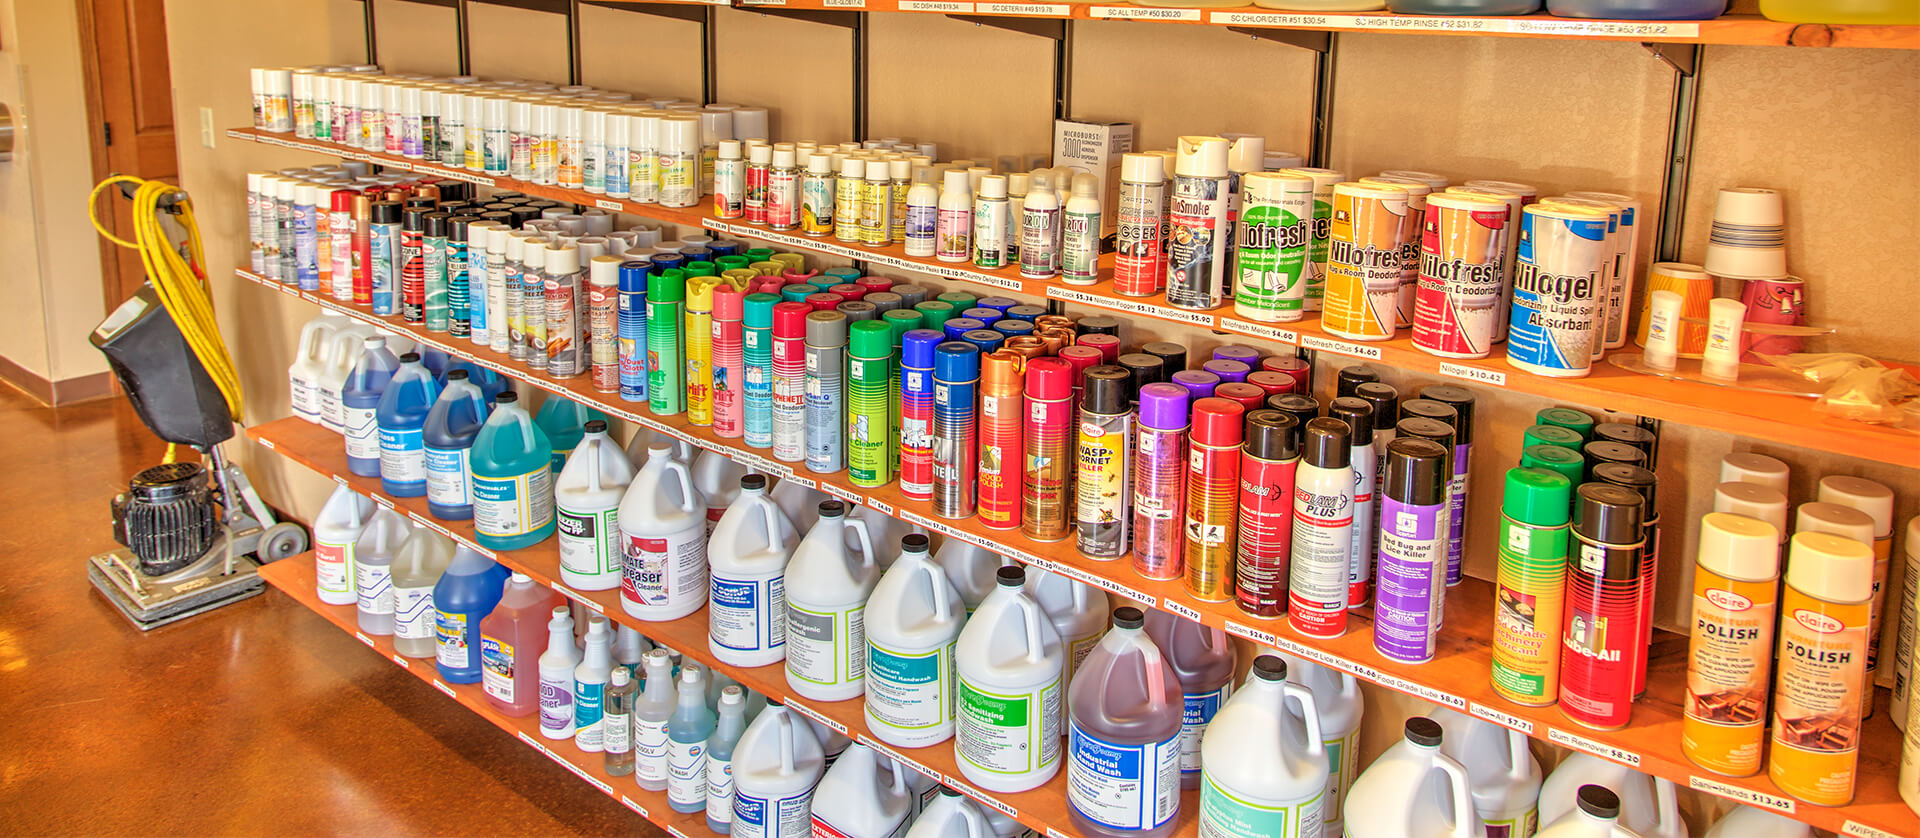 carpet cleaning supply store